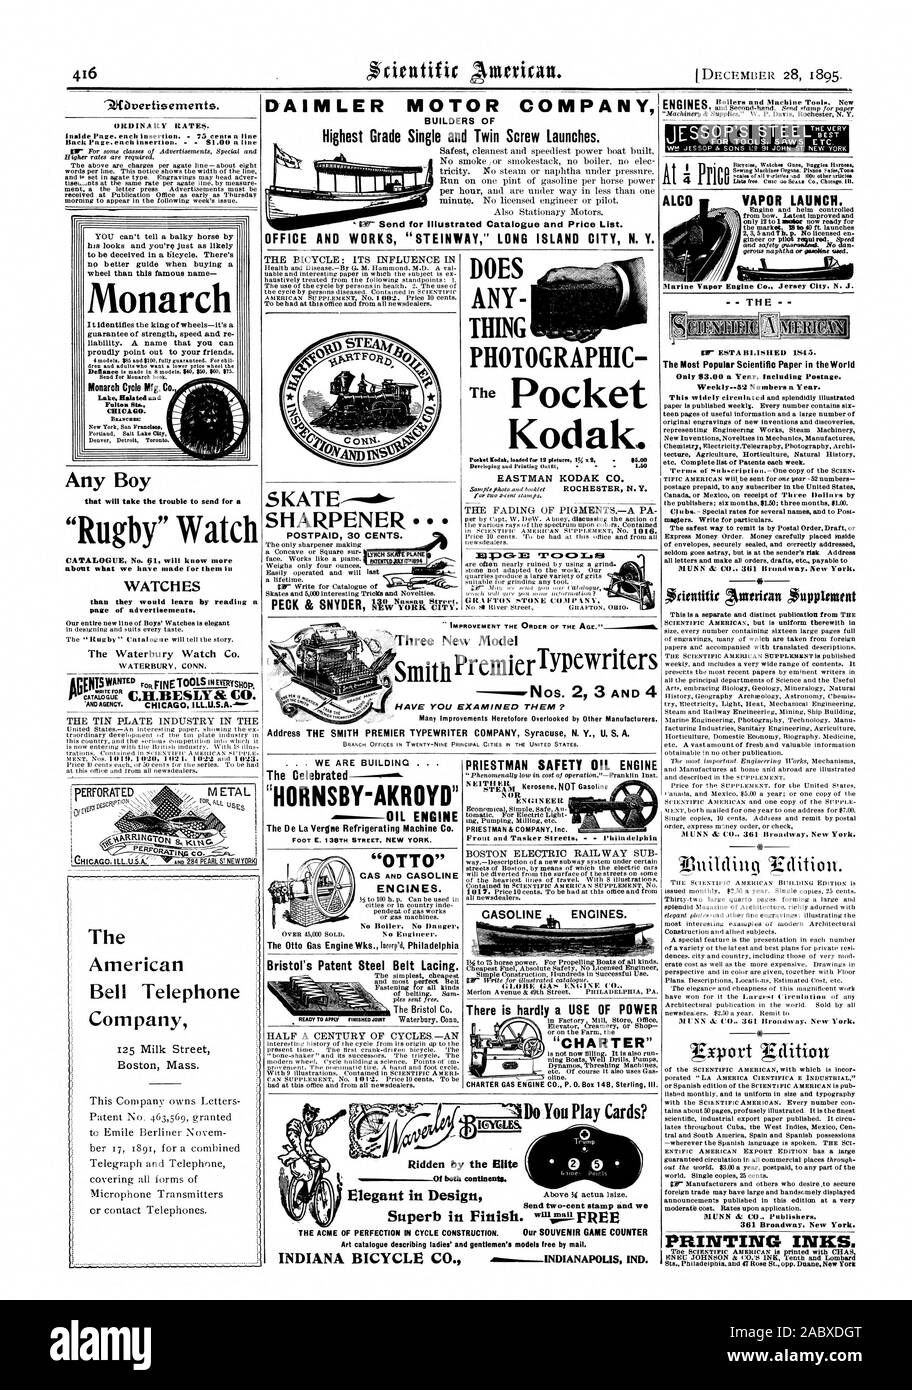 Monarch Monarch Any Boy 'Rugby' Watch CATALOGUE No. 01  The American Bell Telephone Company 125 Milk Street Boston Mass. Boilers and Machine Tools. New Bicycles Watch.; Gans Buggies Harnese ALC VAPOR LAUNCH. Engine and helm controlled only 12 to 1 Engler now ready for the market. 18 to 40 ft. launches The Most Popular Scientific Paper in the World Weekly--52 Numbers a Year. MUNN & CO. 361 Broadway. New York. PRINTING INKS. ENGINES DAIMLER MOTOR COMPANY BUILDERS OF Highest Grade Single and Twin Screw Launches. OFFICE AND WORKS 'STEINWAY' LONG ISLAND CITY N. Y. POSTPAID 30 CENTS. IMPROVEMENT THE Stock Photo